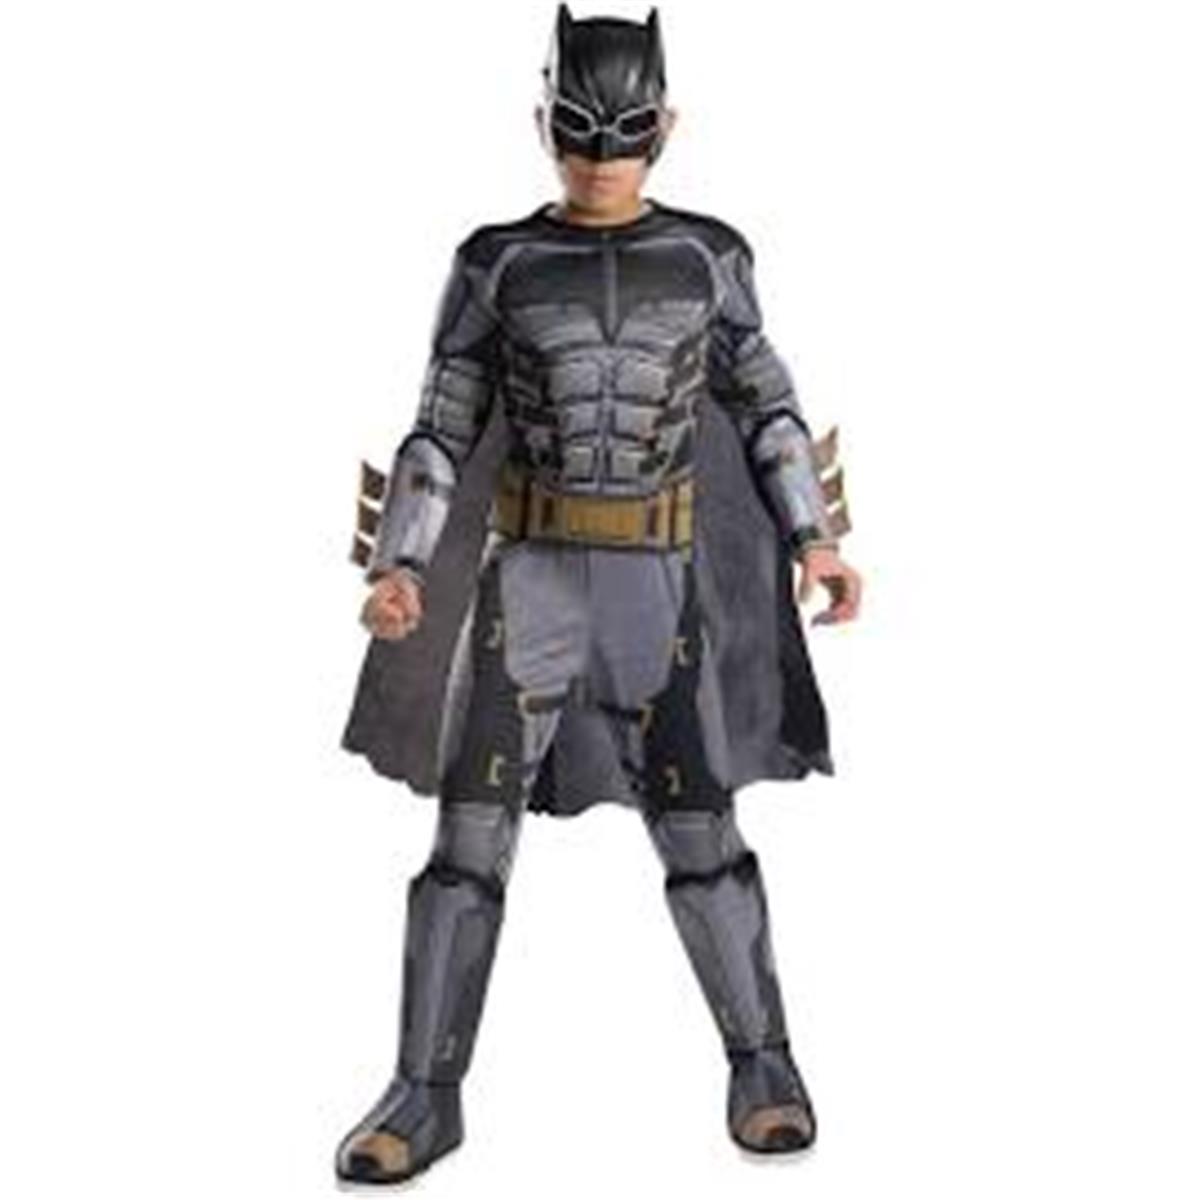 Picture of Rubies 249197 Justice League Movie Tactical Batman Deluxe Child Costume, Small